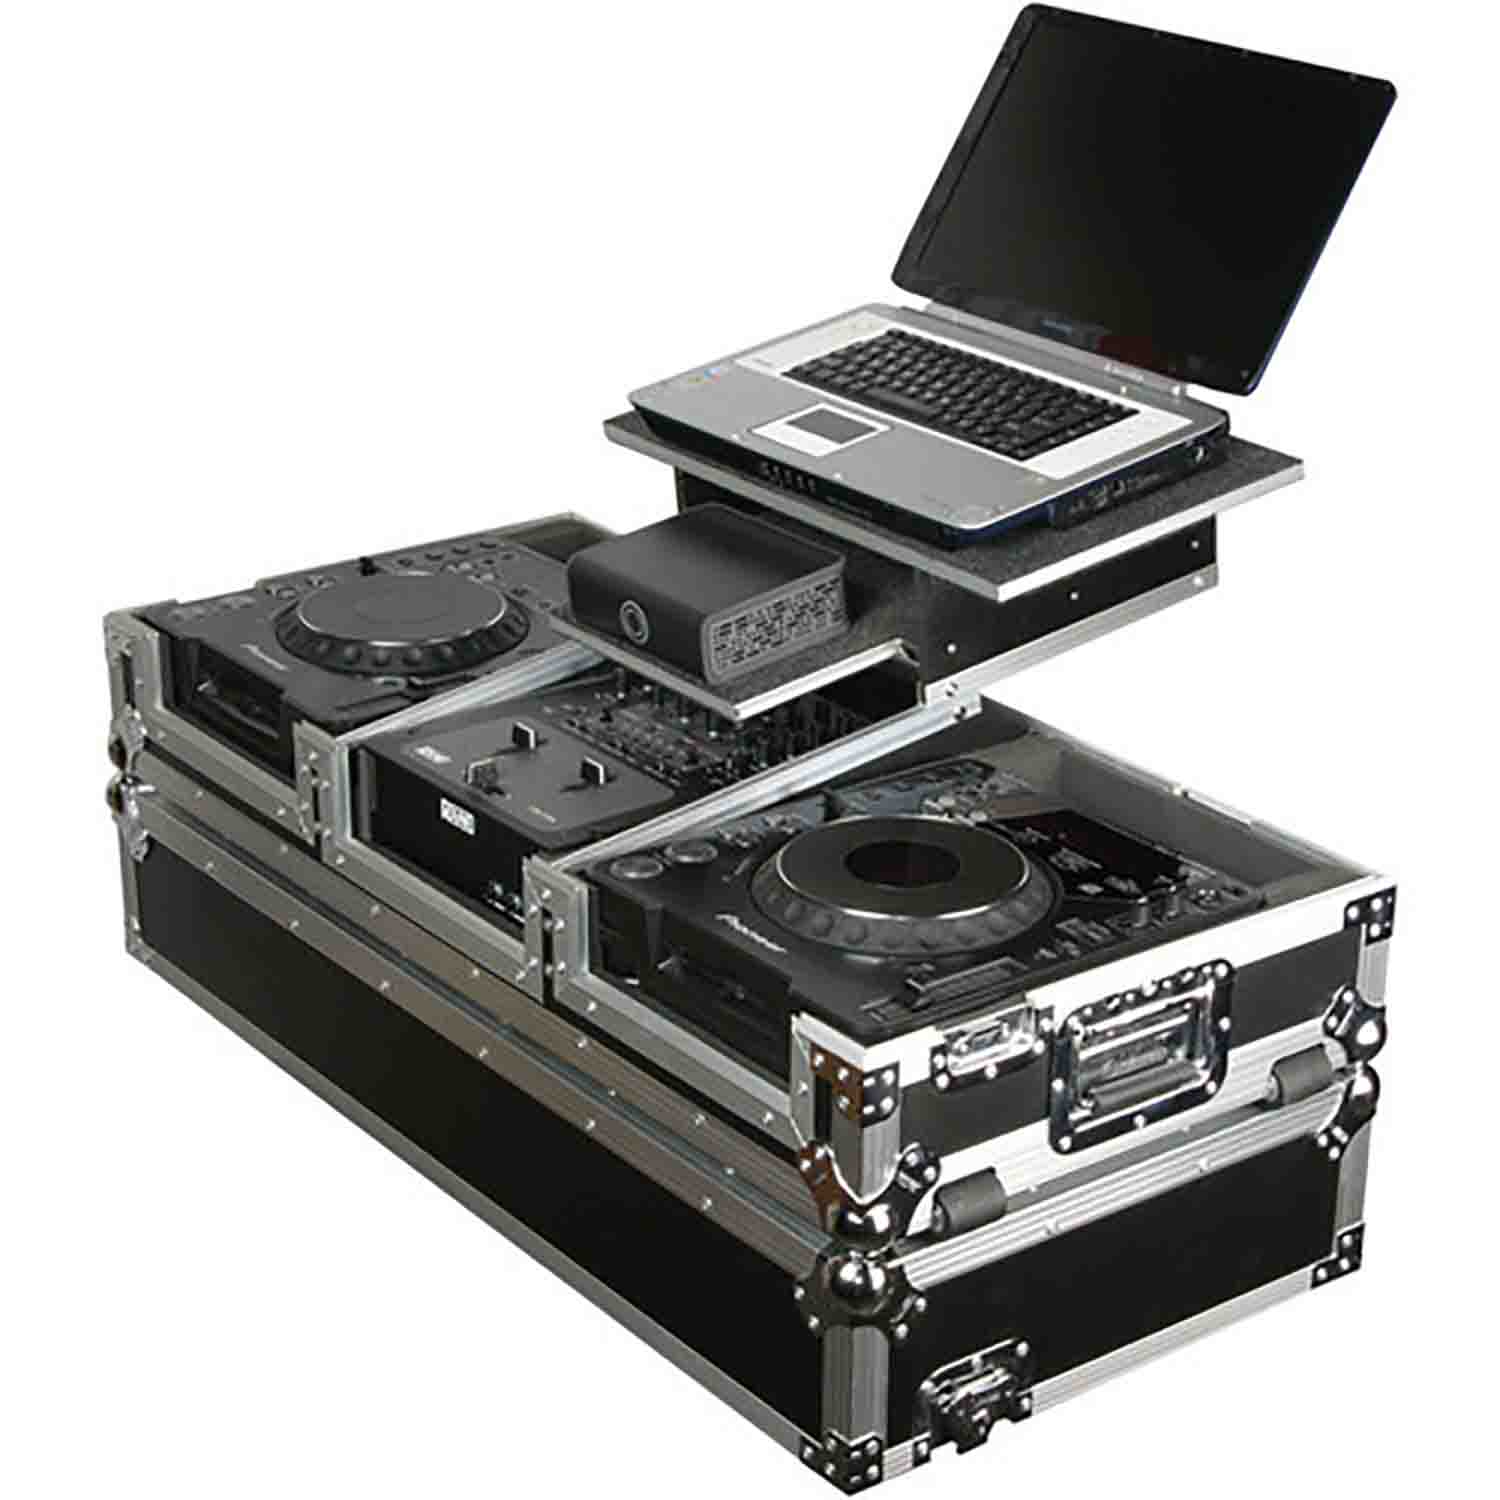 Open Box: Odyssey FZGS10CDJW Glide Style DJ Coffin Case for Laptop and CD Mixer with Wheels - Hollywood DJ